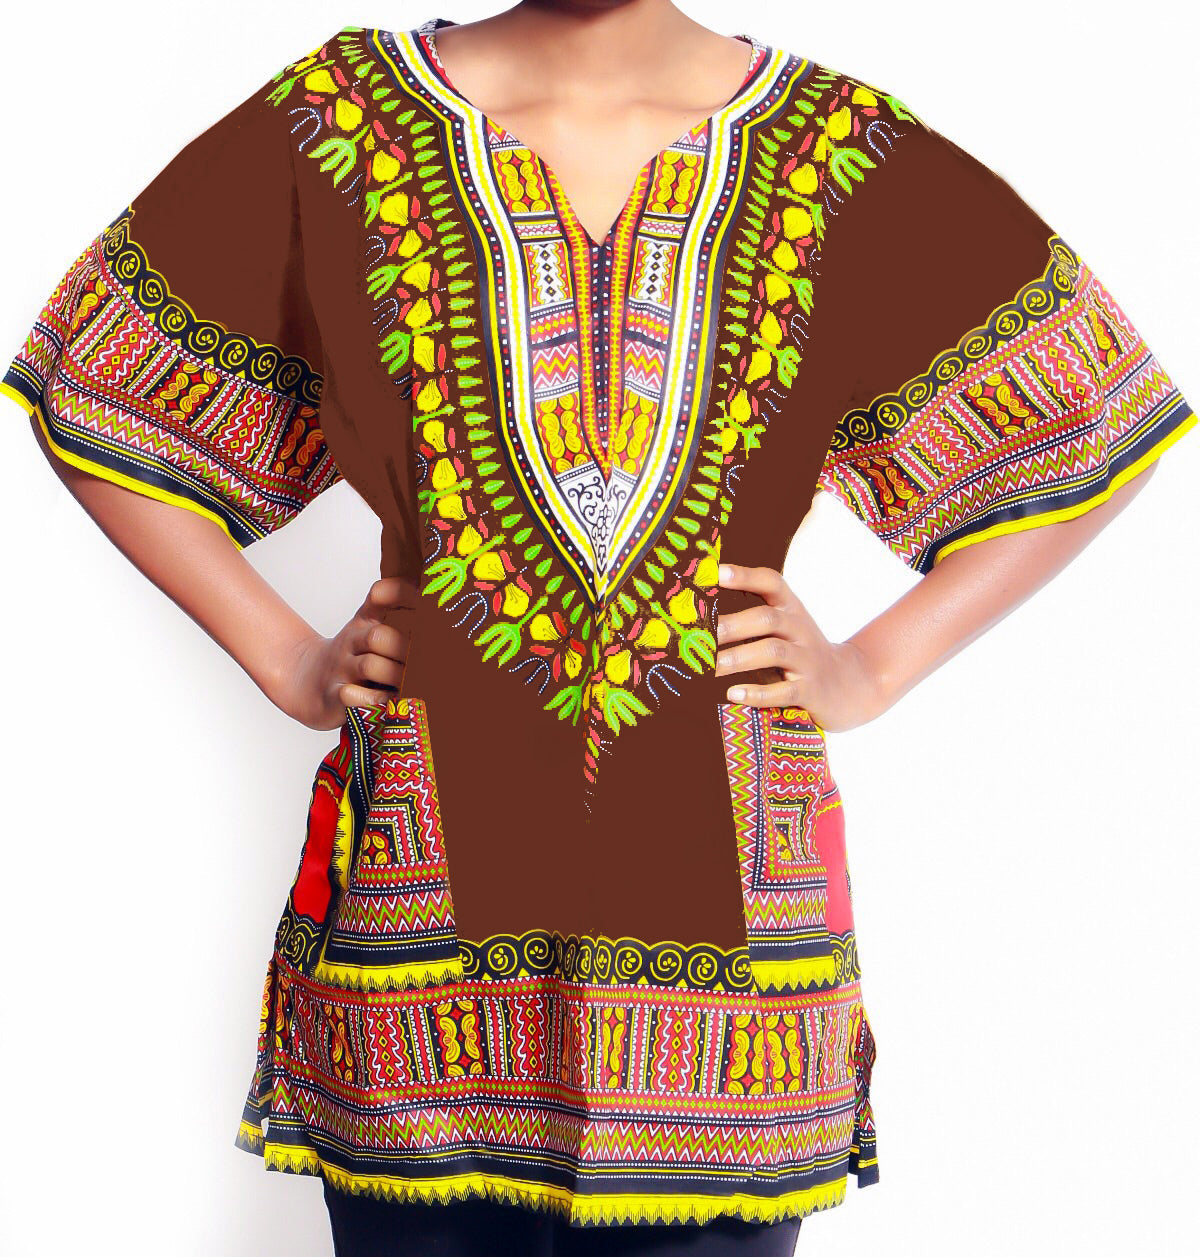 The "One Love For All Humanity"  REAL QUALITY Dashiki Sets (All Styles)